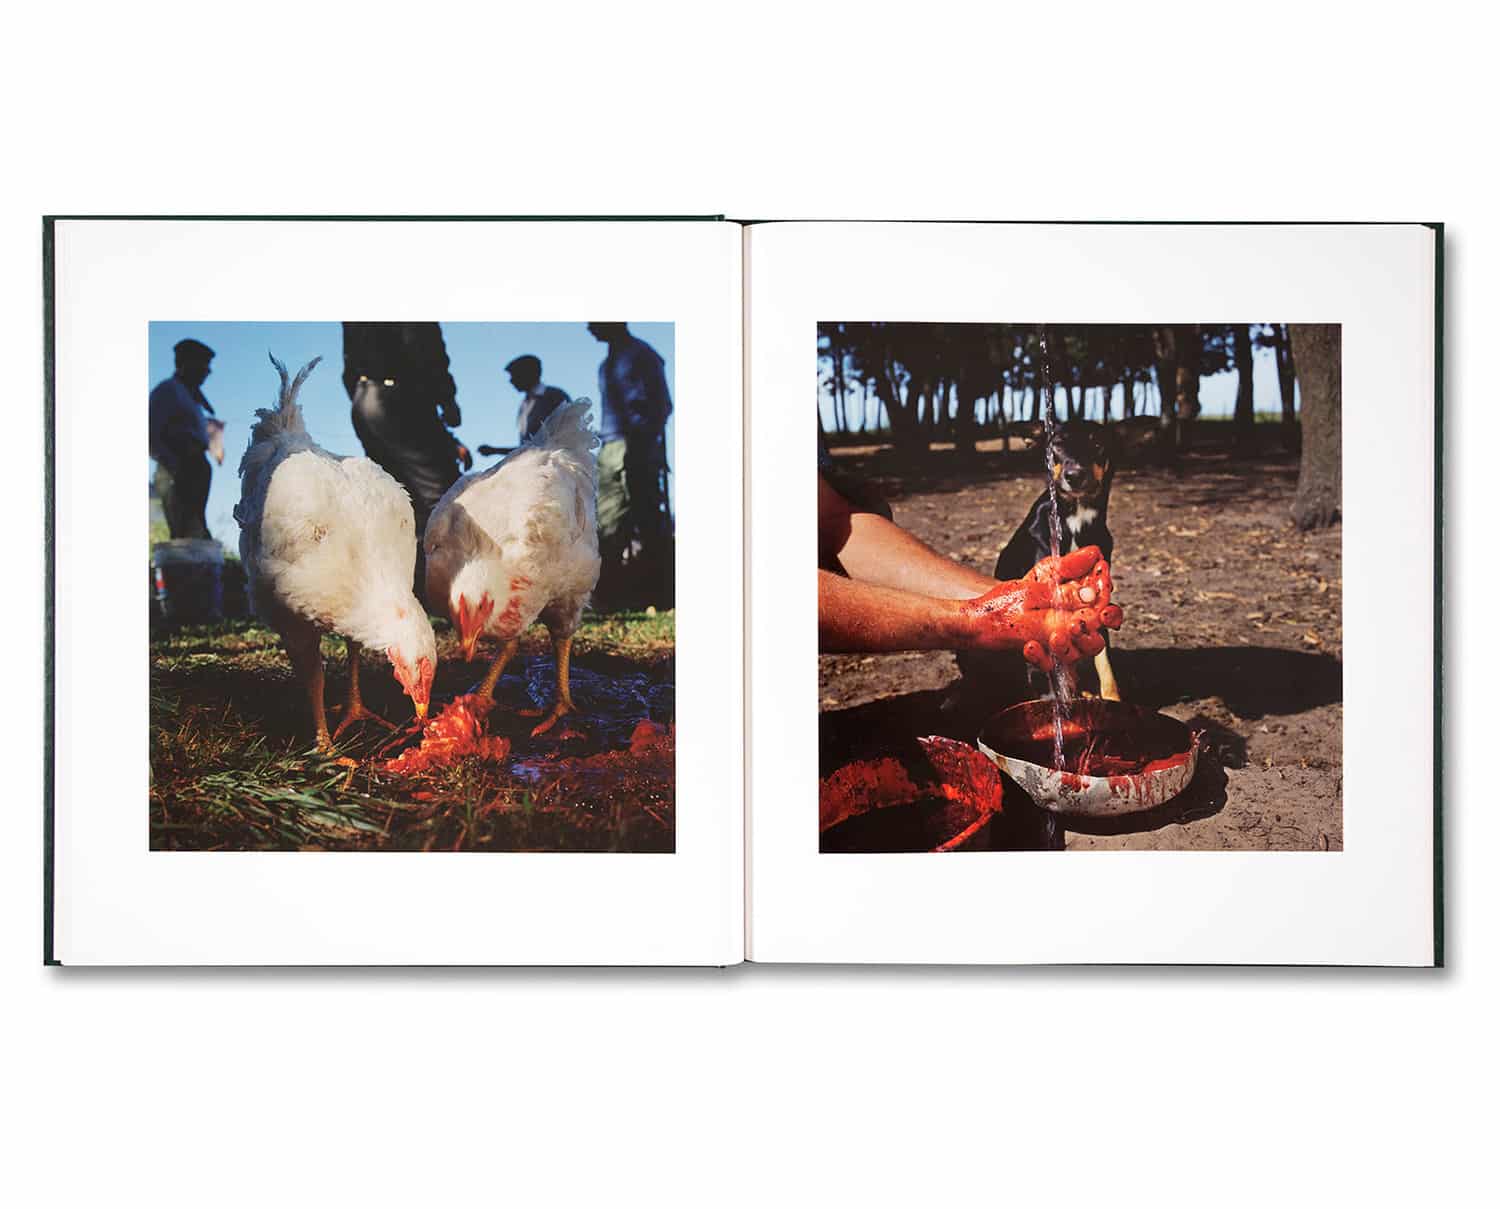 Alessandra Sanguinetti 'On the Sixth Day' (signed) - Fragment